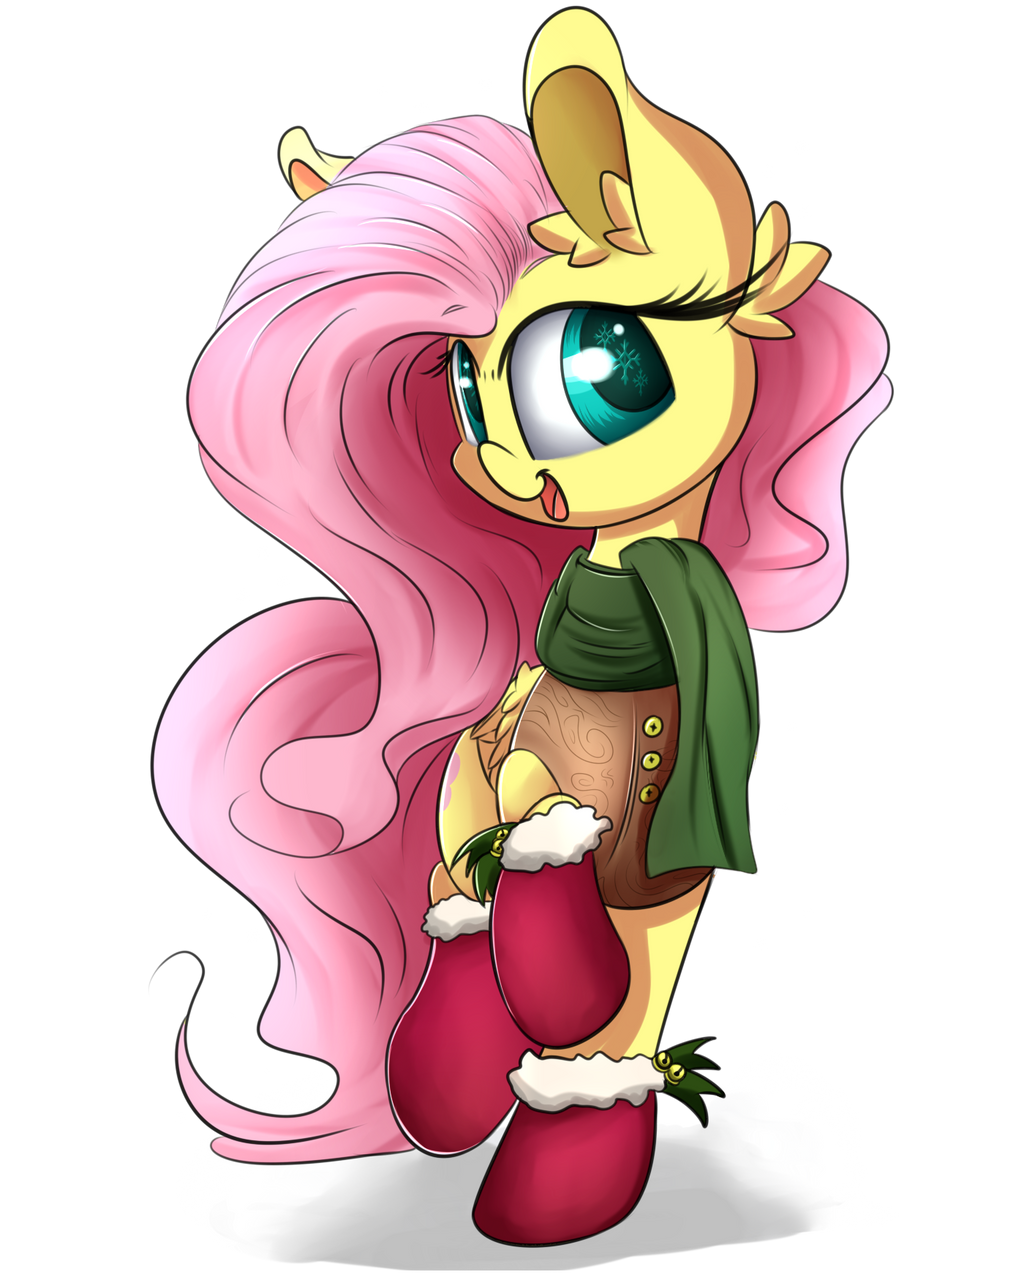 wintershy_by_madacon_d9ju0ad-fullview.png